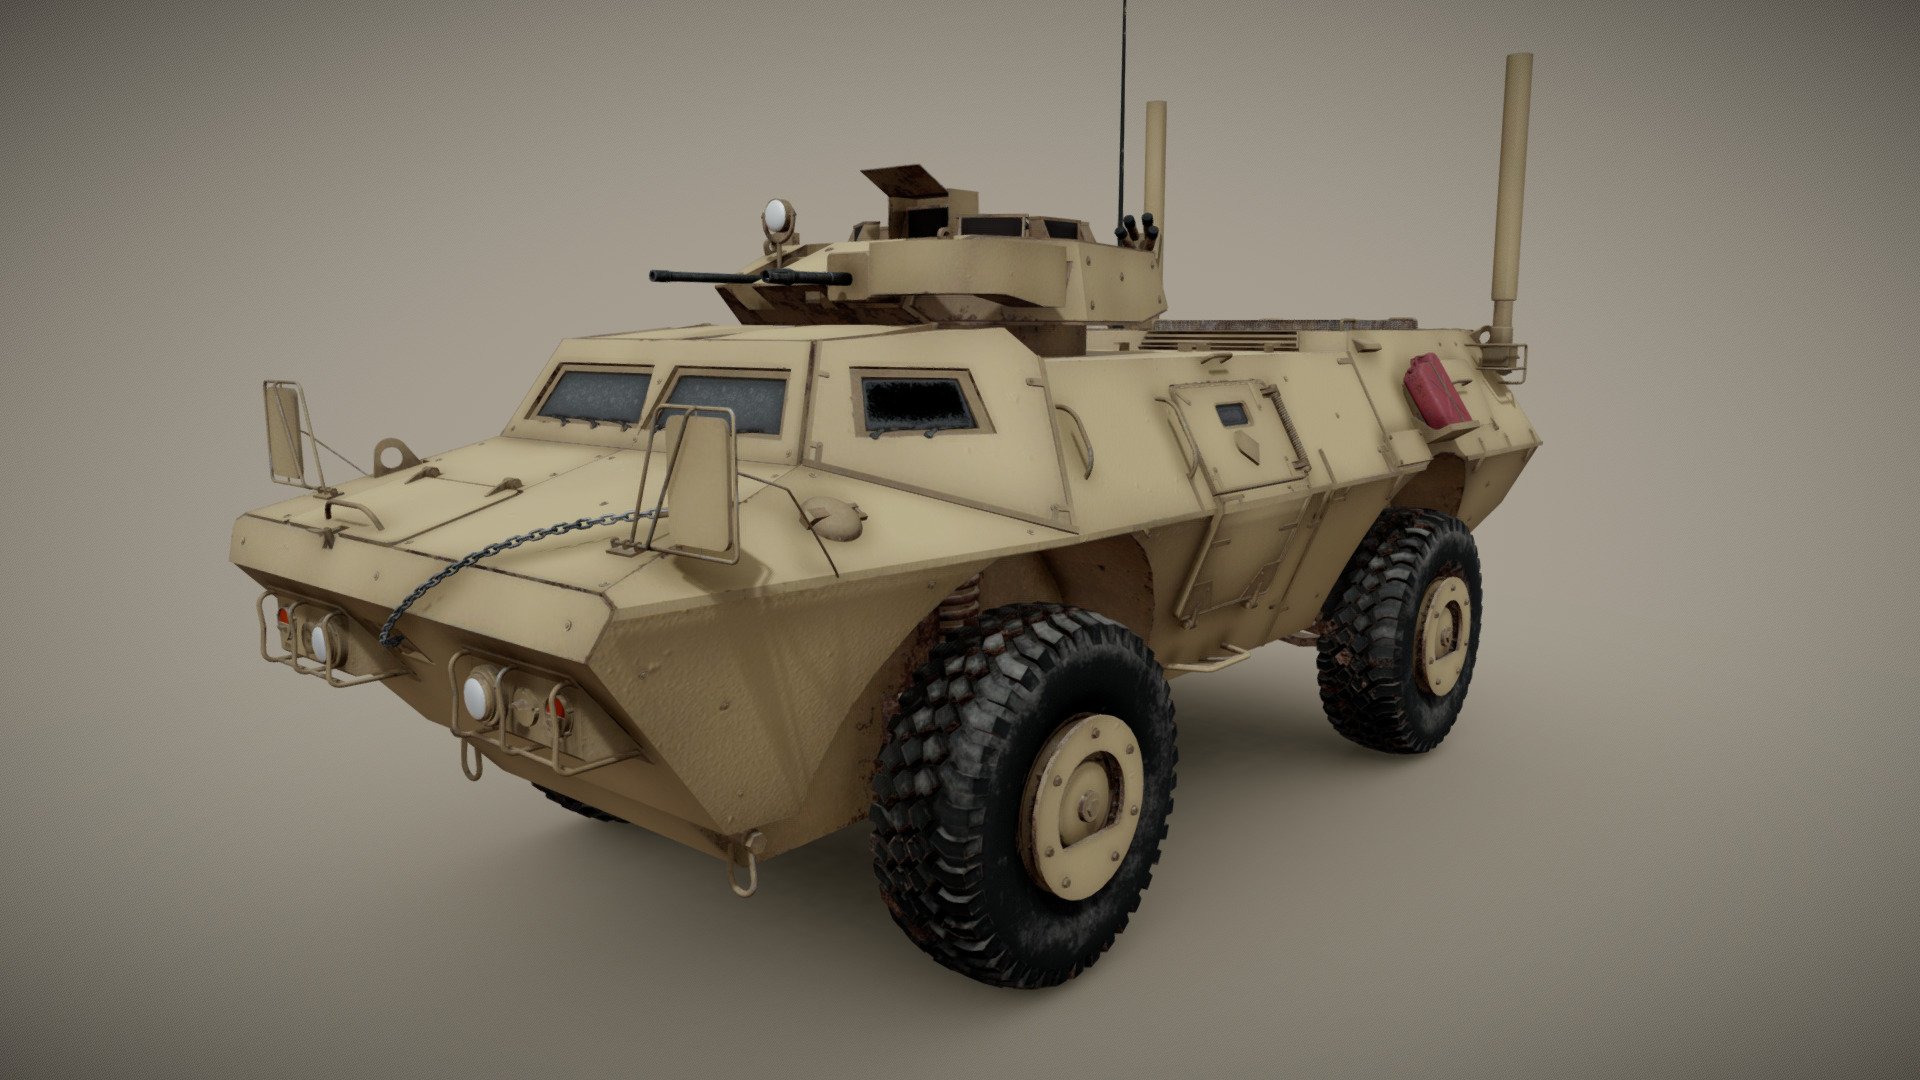 The M1117 Guardian, also denoted Armored Security Vehicle (ASV), is an internal security vehicle based on the V-100 and V-150 Commando series of armored cars. It was developed in the late 1990s for service with the United States Military Police Corps. The first prototypes appeared in February 1997 and serial production of the M1117 commenced between 1999 and early 2000.

The M1117 was one of the first American military vehicles to be built on a specialized mine-resistant hull, and after 2001 was adopted in increasing numbers as a direct response to the threat posed by improvised explosive devices to US forces in Iraq and Afghanistan. Its armament consists of an Mk 19 grenade launcher and M2HB Browning machine gun, mounted in a turret similar to that used on the United States Marine Corps' Amphibious Assault Vehicle, and a M240H Medium Machine Gun mounted outside the gunner's hatch 3d model